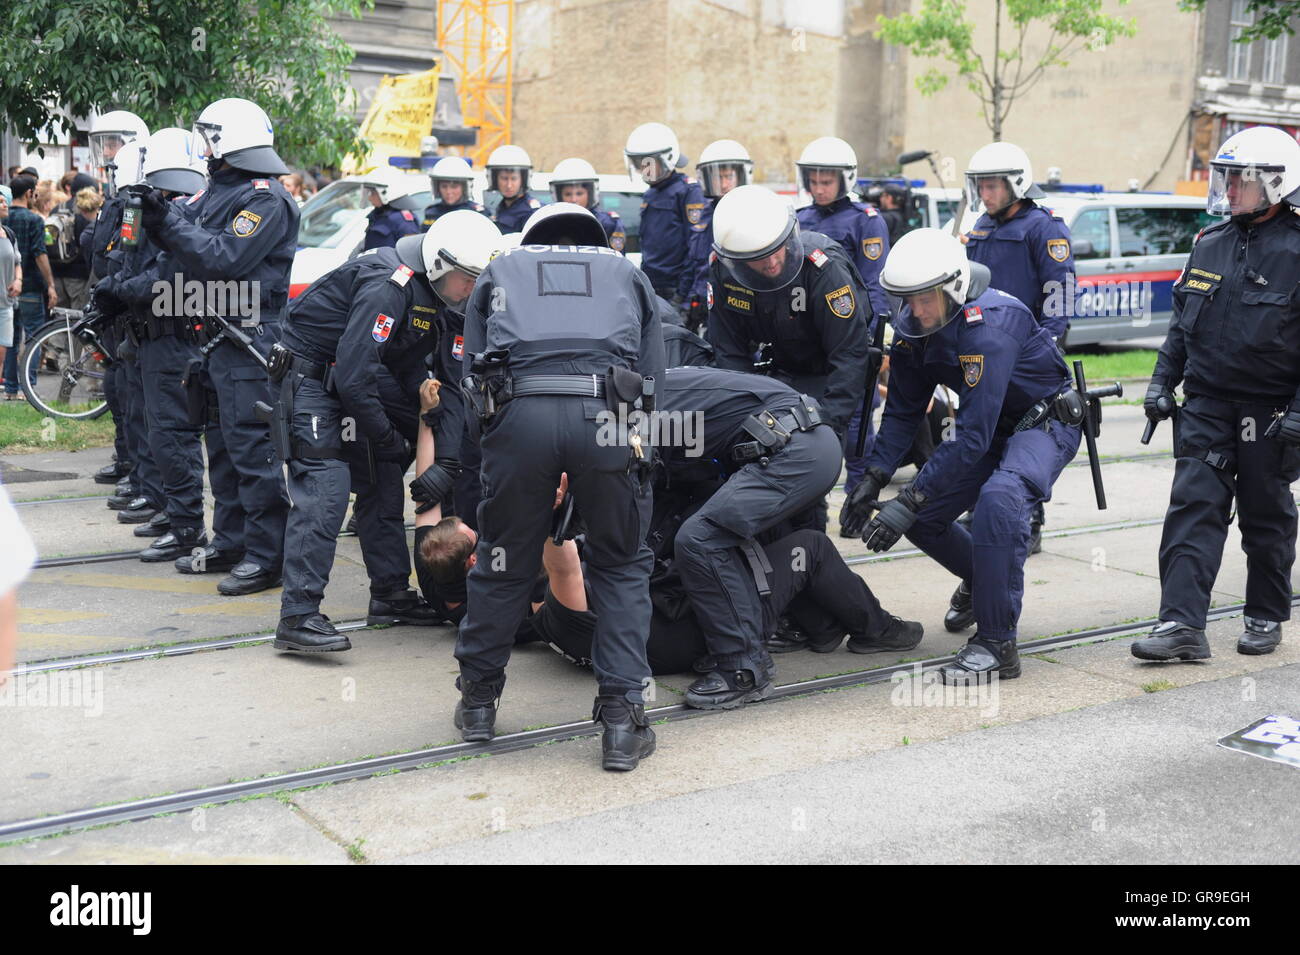 Police Presence At Demonstrations Stock Photo